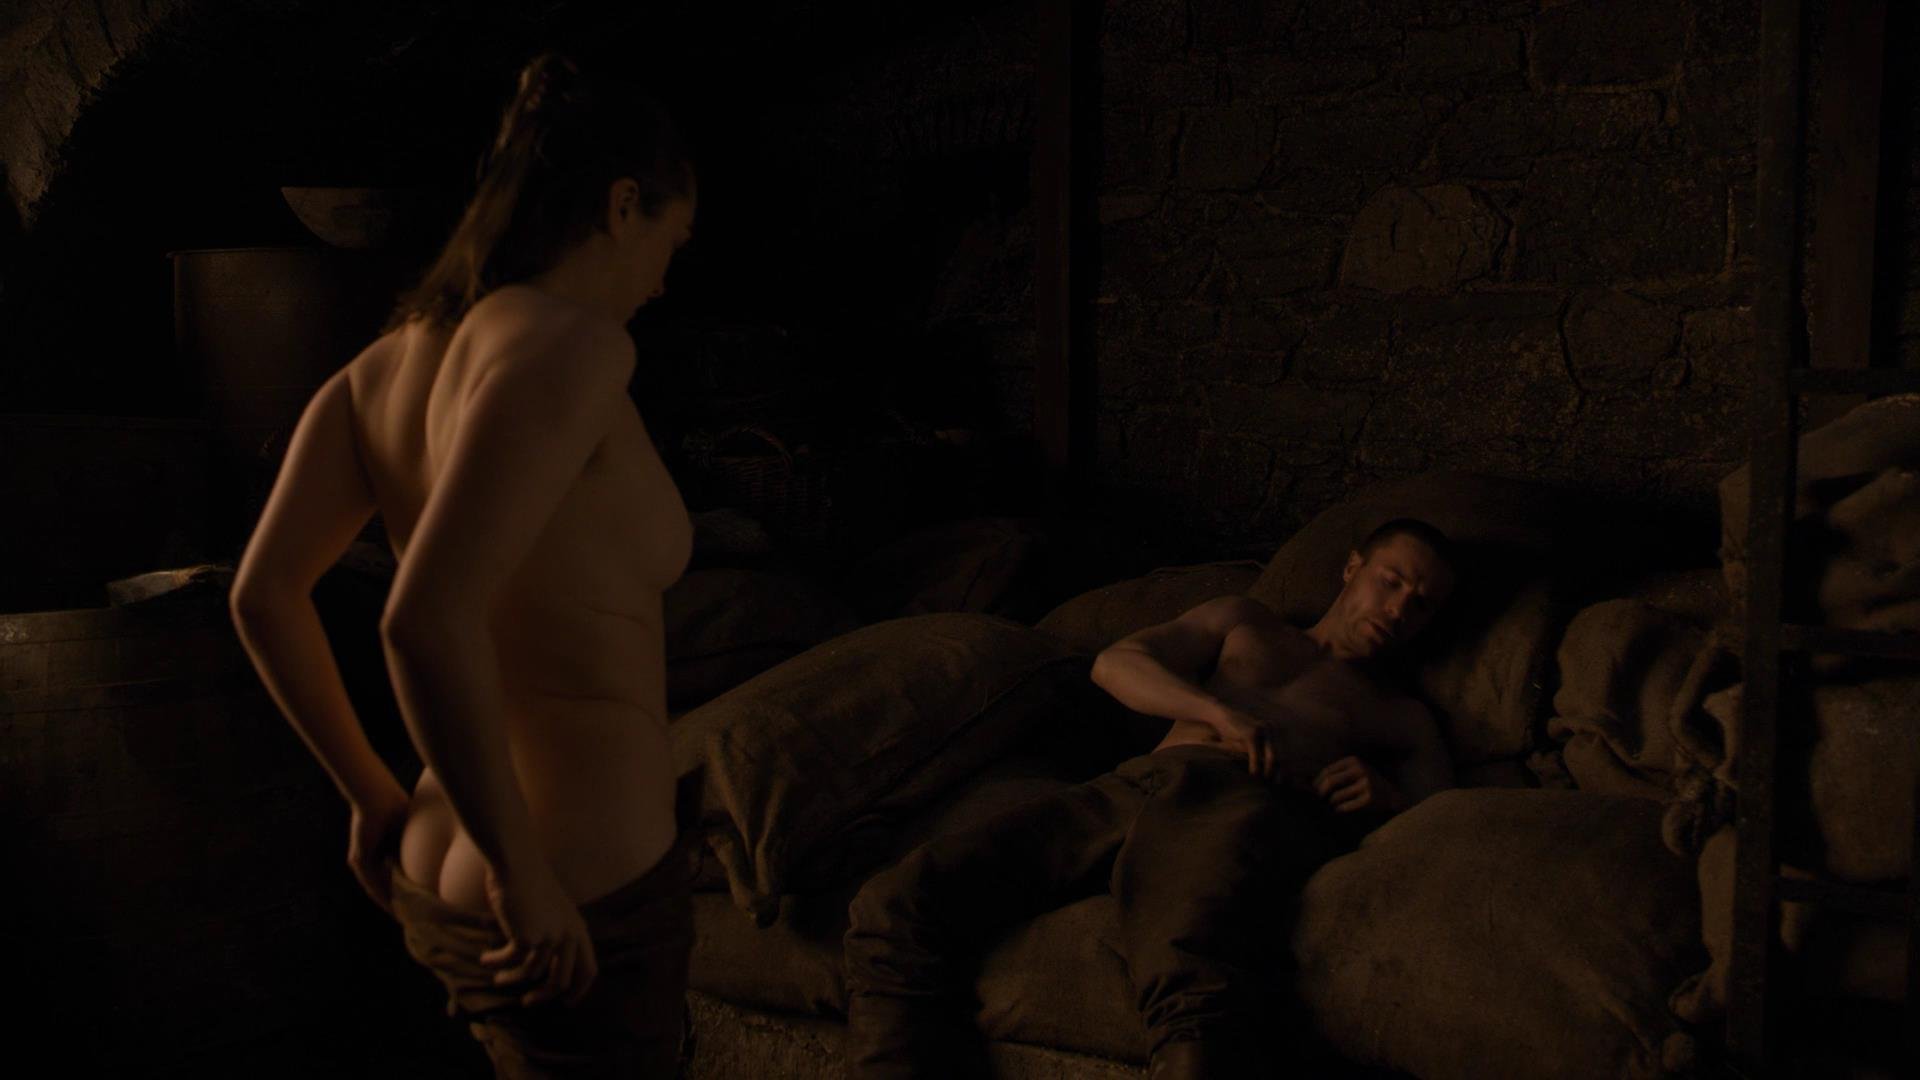 Maisie Williams Nude - Game of Thrones (10 Pics + GIFs & Video)